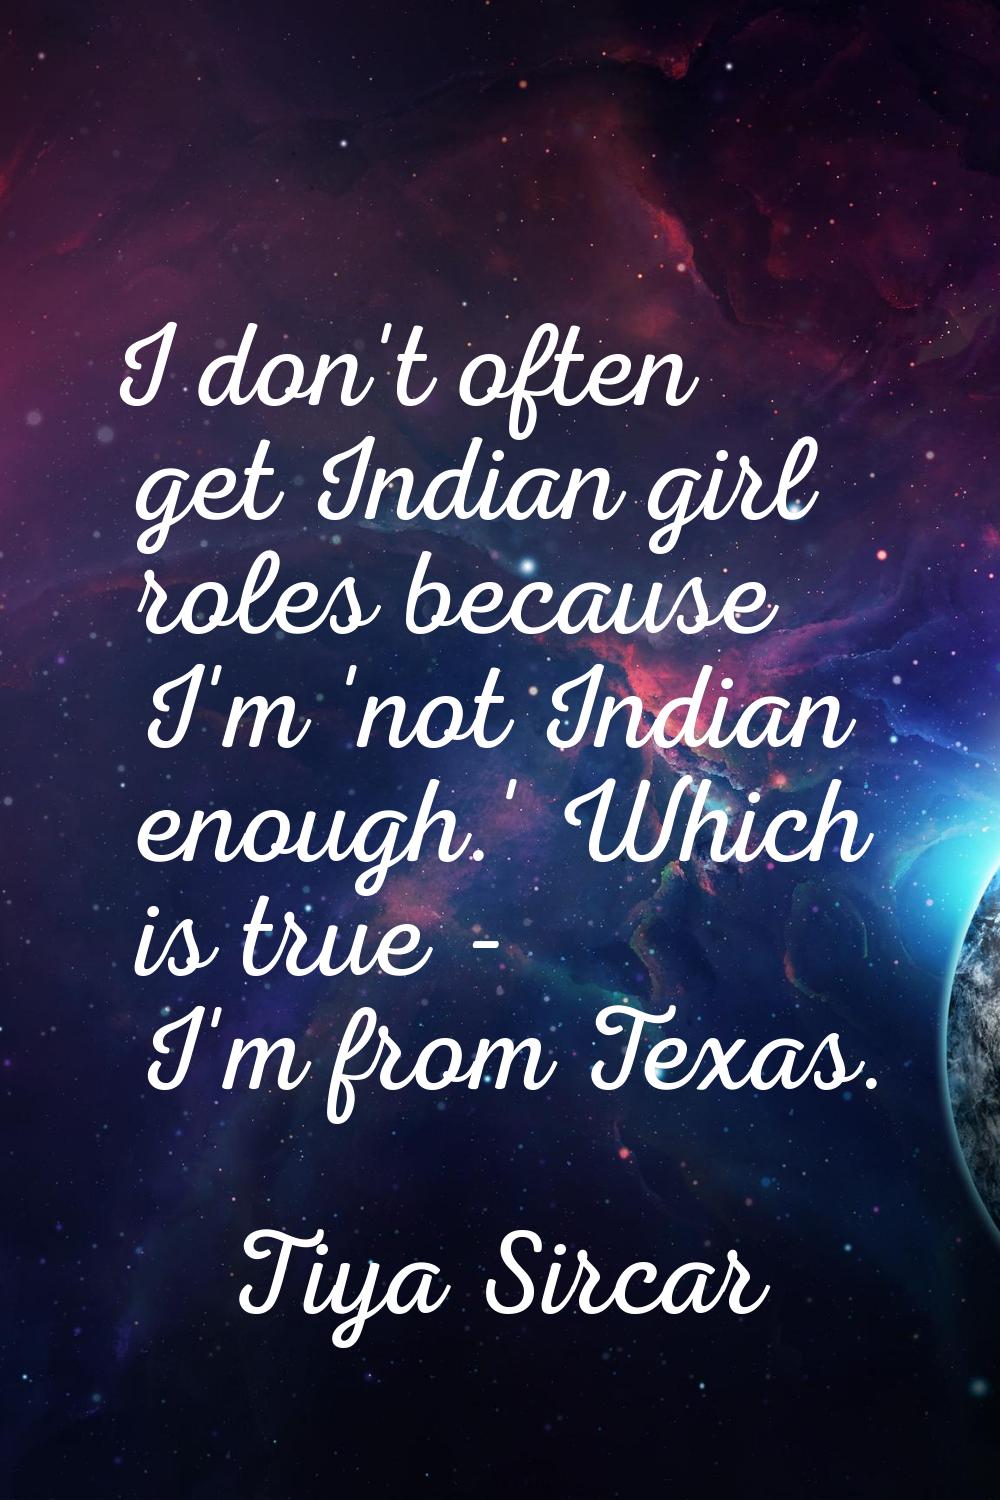 I don't often get Indian girl roles because I'm 'not Indian enough.' Which is true - I'm from Texas